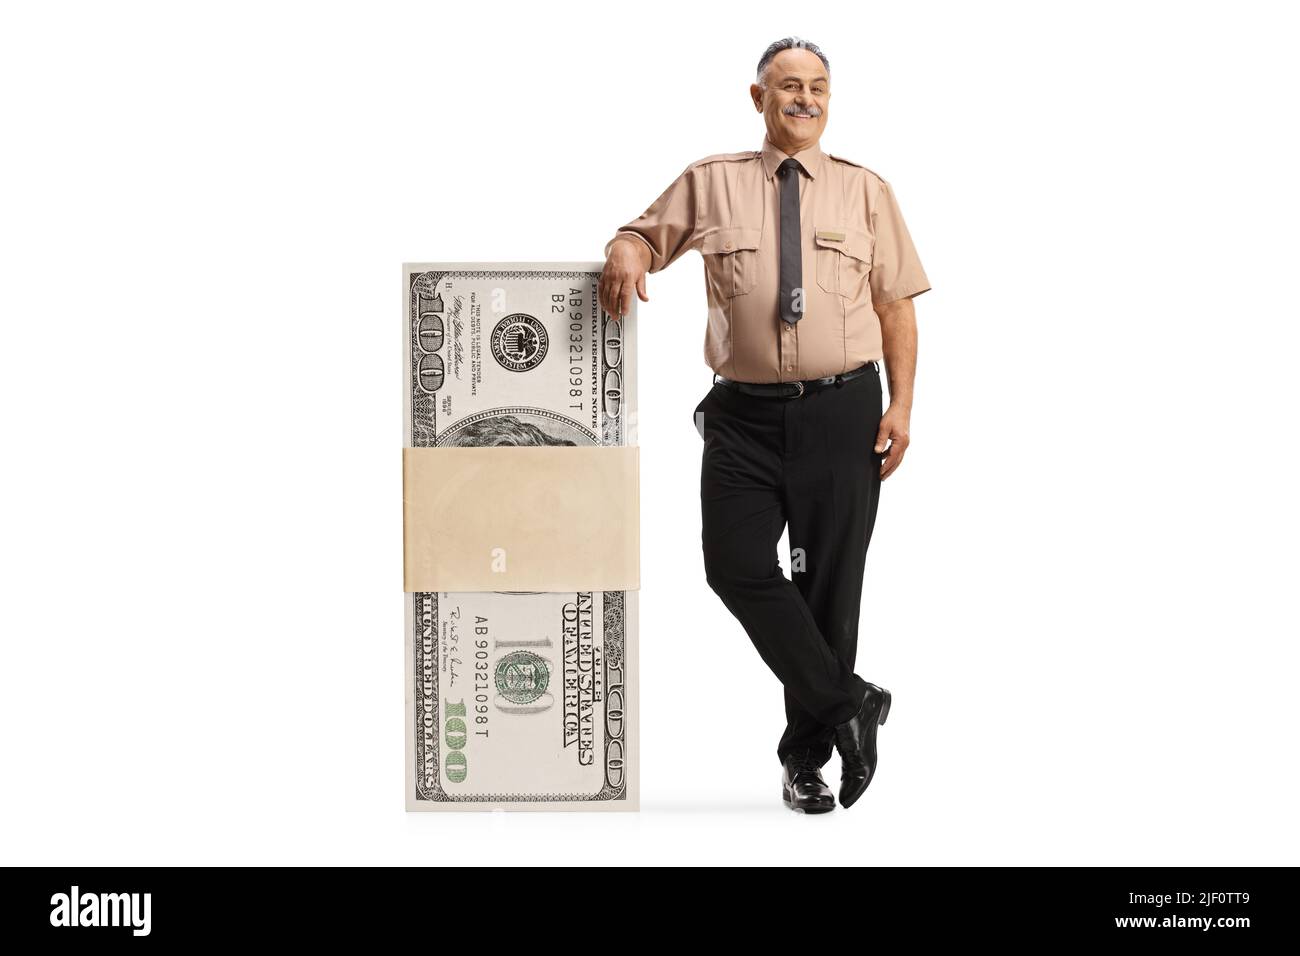 Security officer leaning on a stack of us dollar banknotes isolated on white background Stock Photo